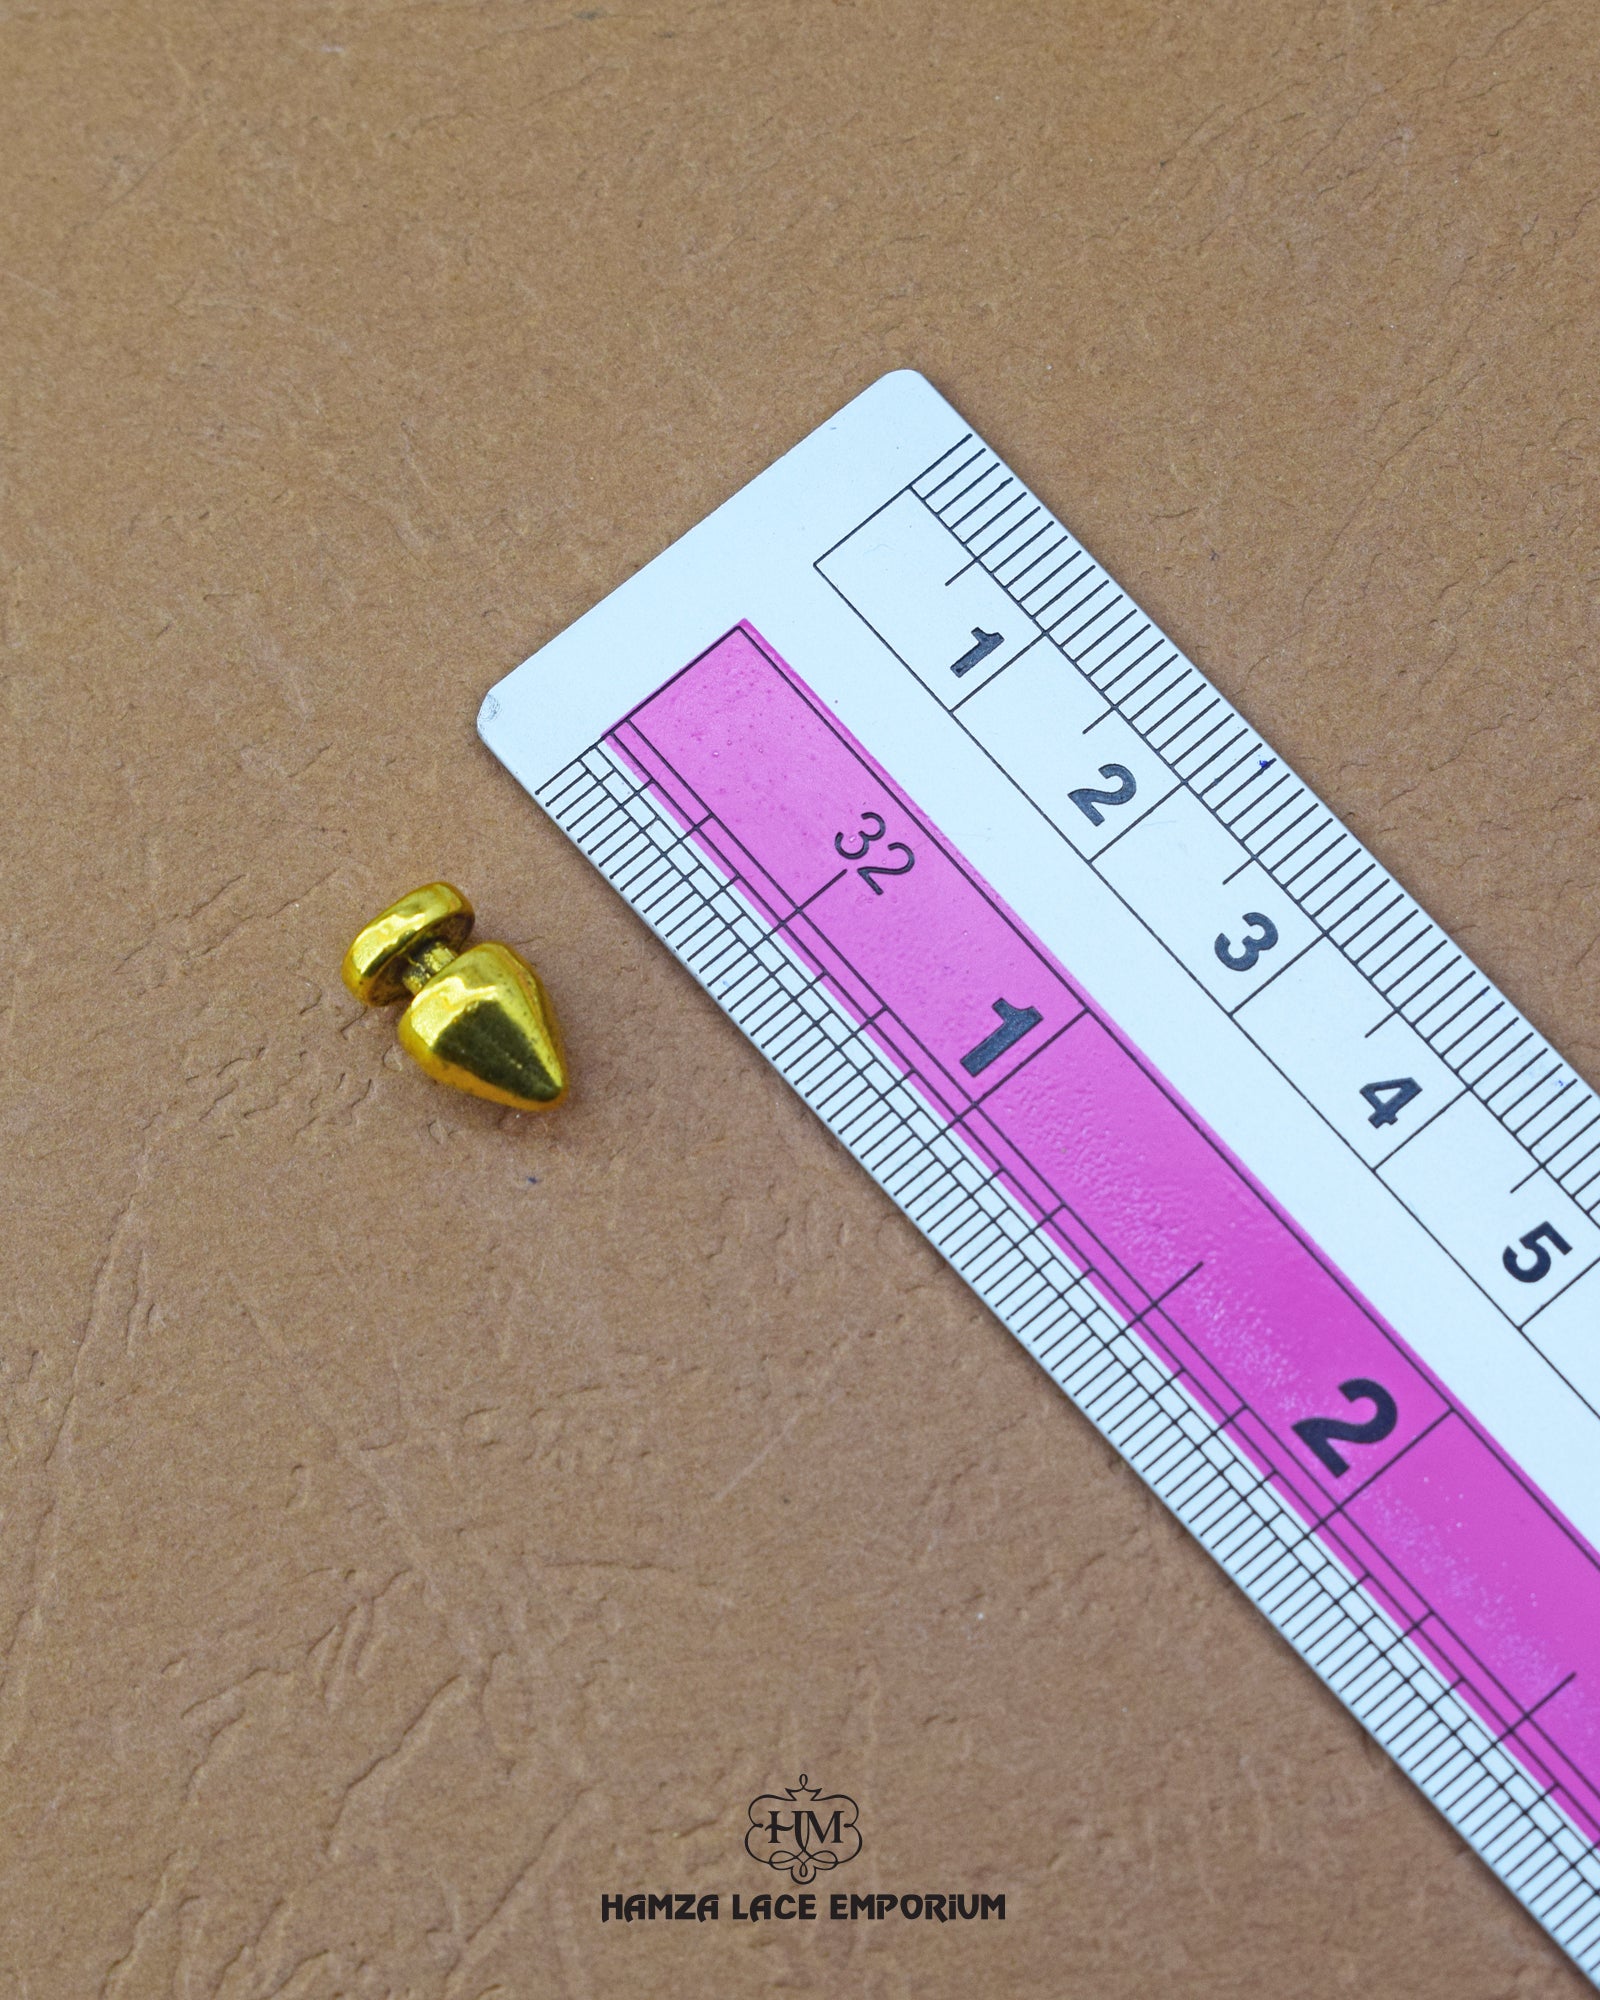 'Hanging Metal Button MA665' with ruler for size reference in the product image.